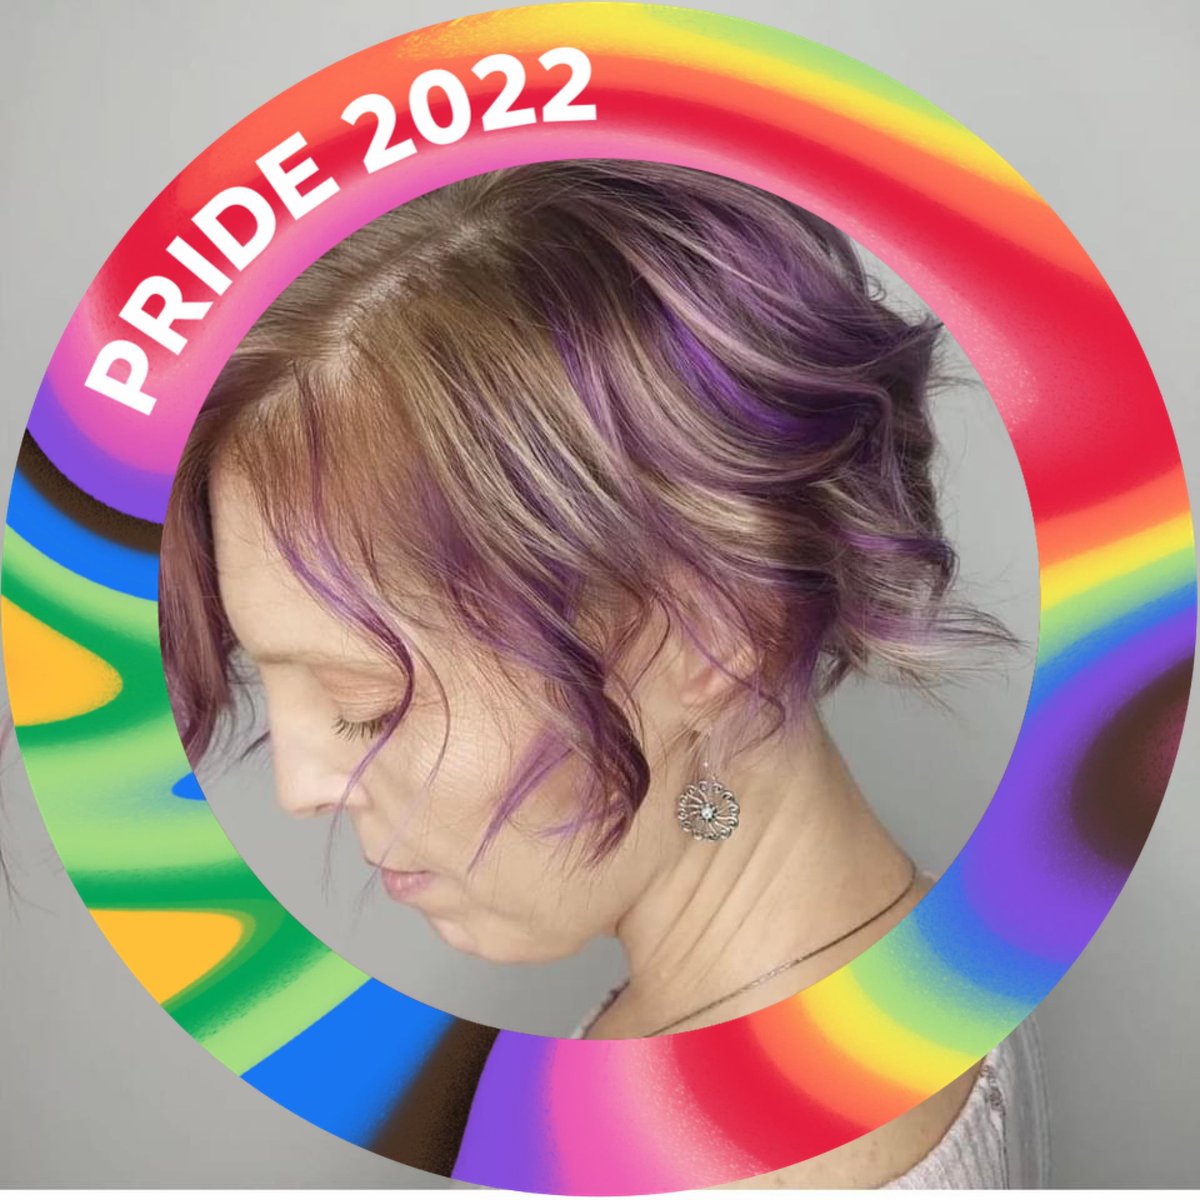 @darafaye Thomas worked at a church. on facebook, his covers are bible quotes and a picture of his baptism. the cover pic of the woman who stopped him shows her with rainbow hair and Pride slogans. its never the draq queens @Kaylan_TX